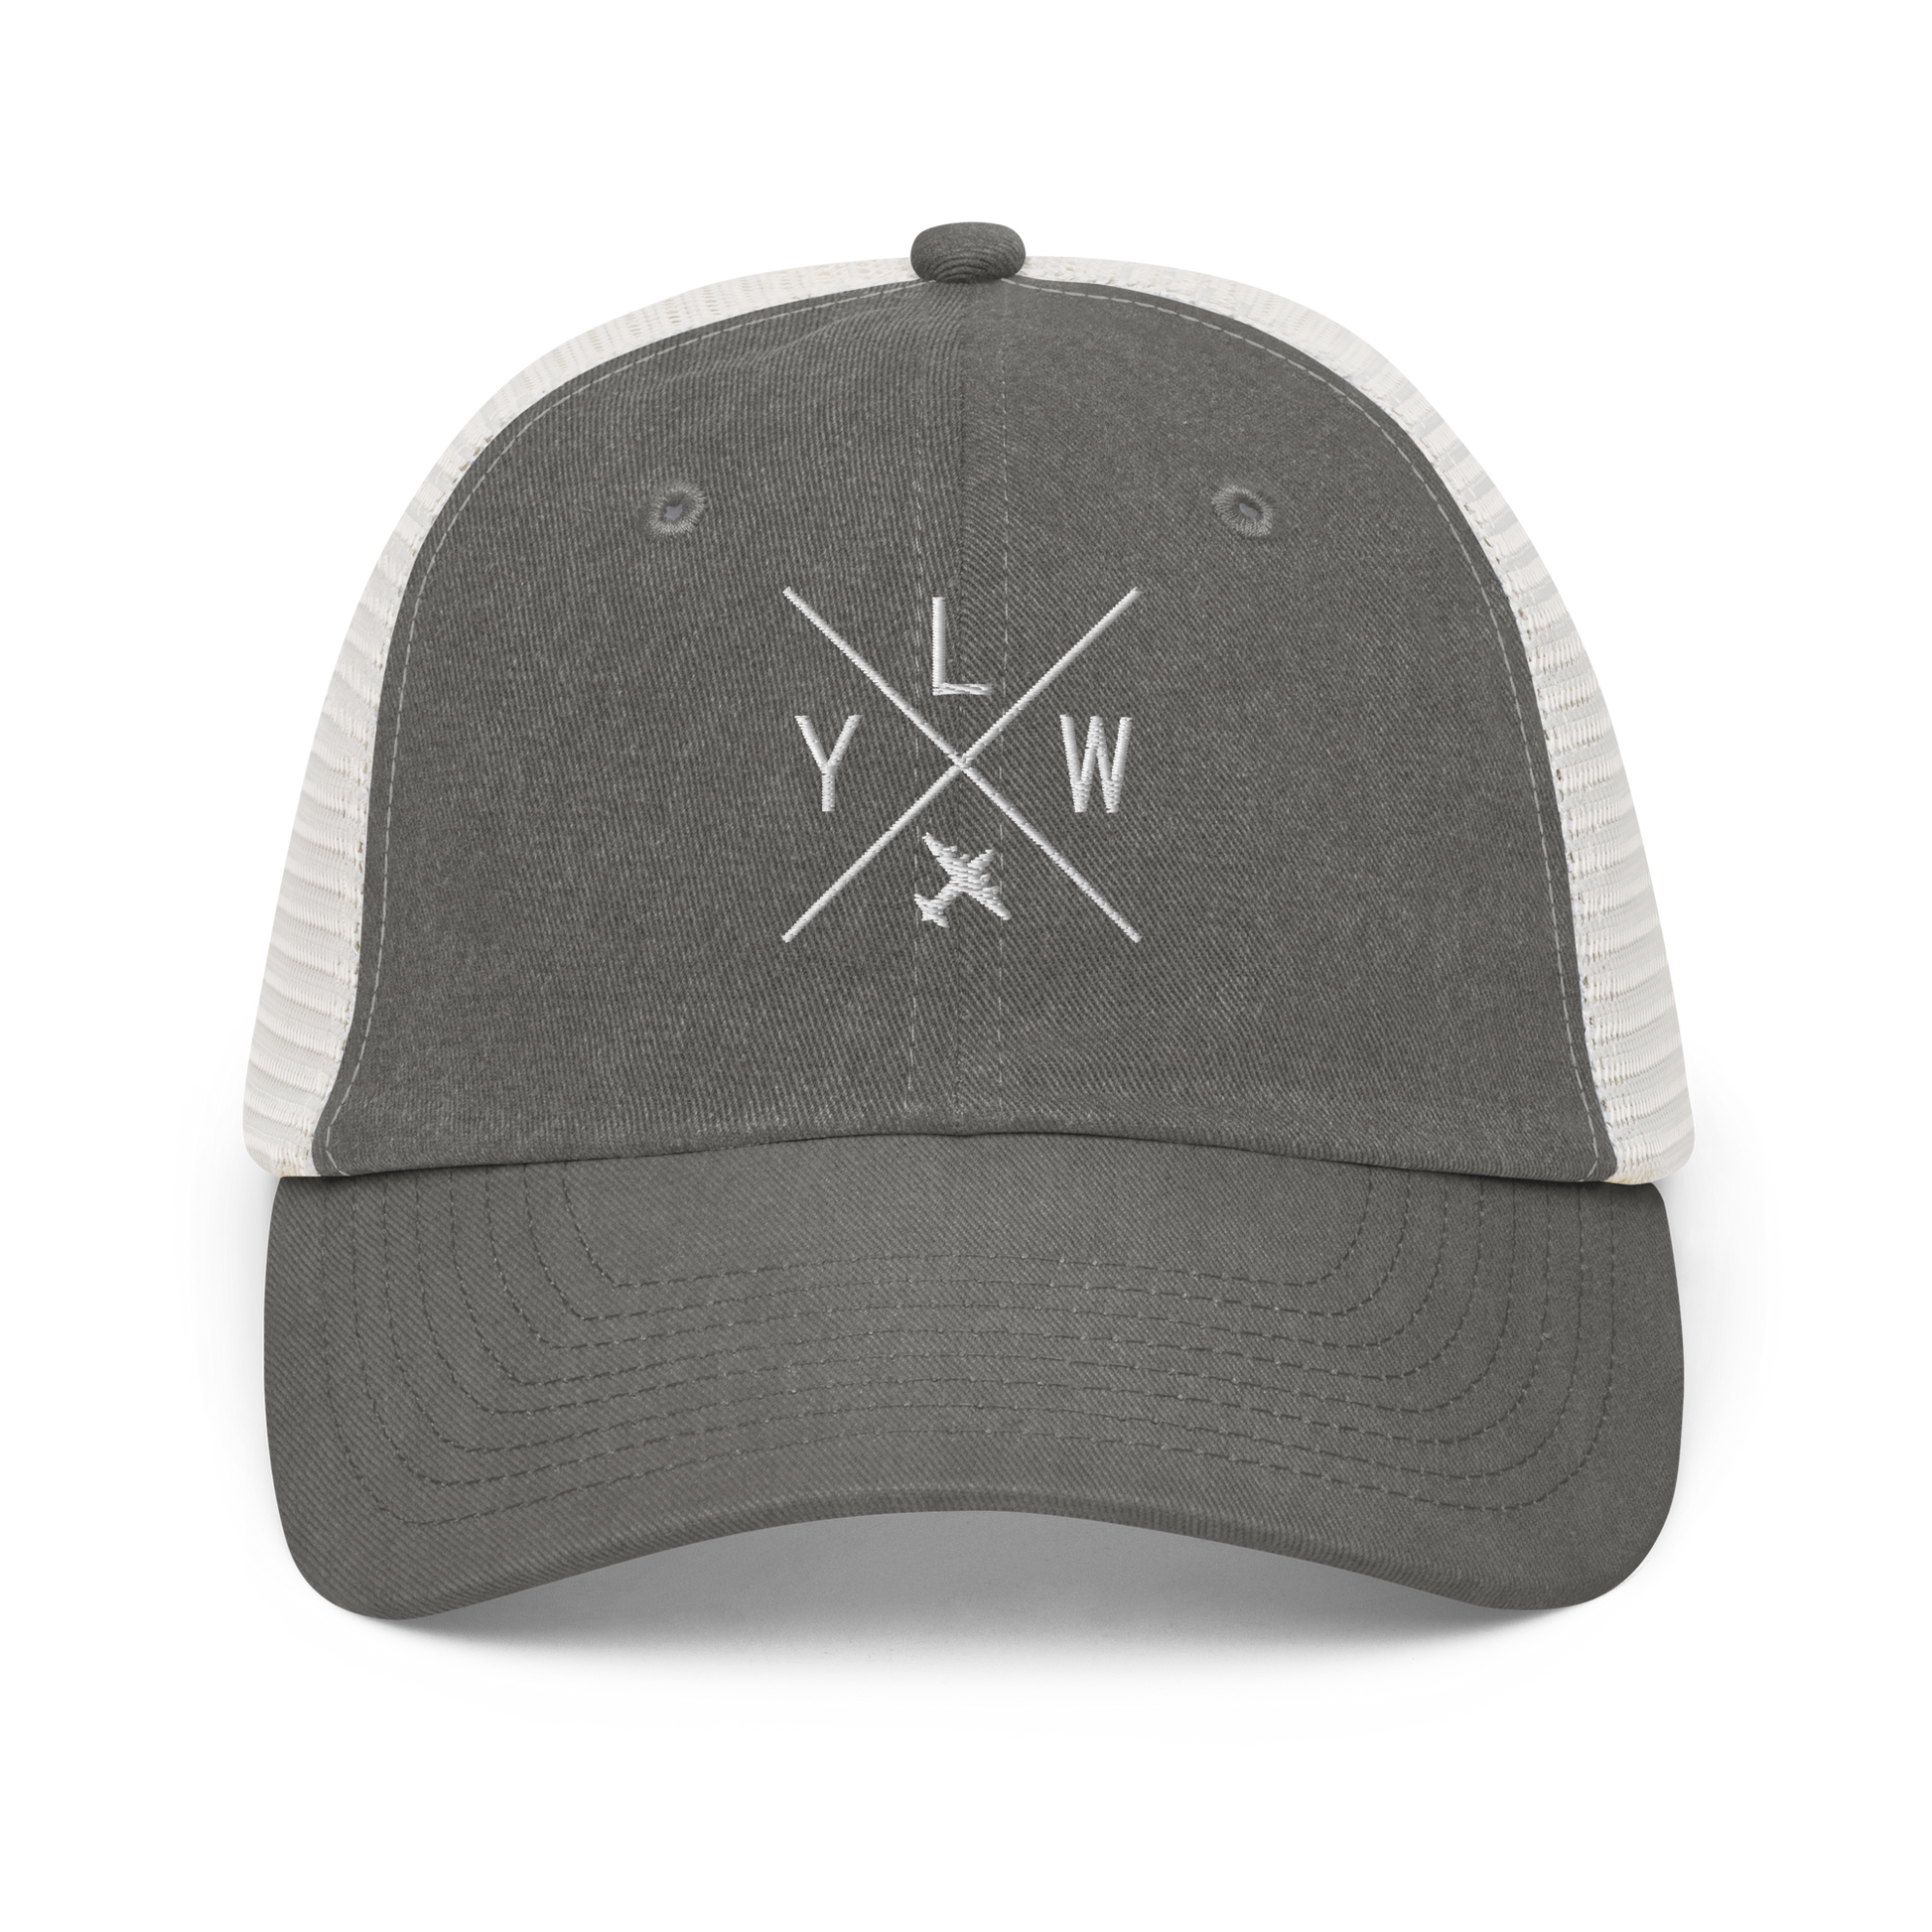 YHM Designs - YLW Kelowna Pigment-Dyed Trucker Cap - Crossed-X Design with Airport Code and Vintage Propliner - White Embroidery - Image 09